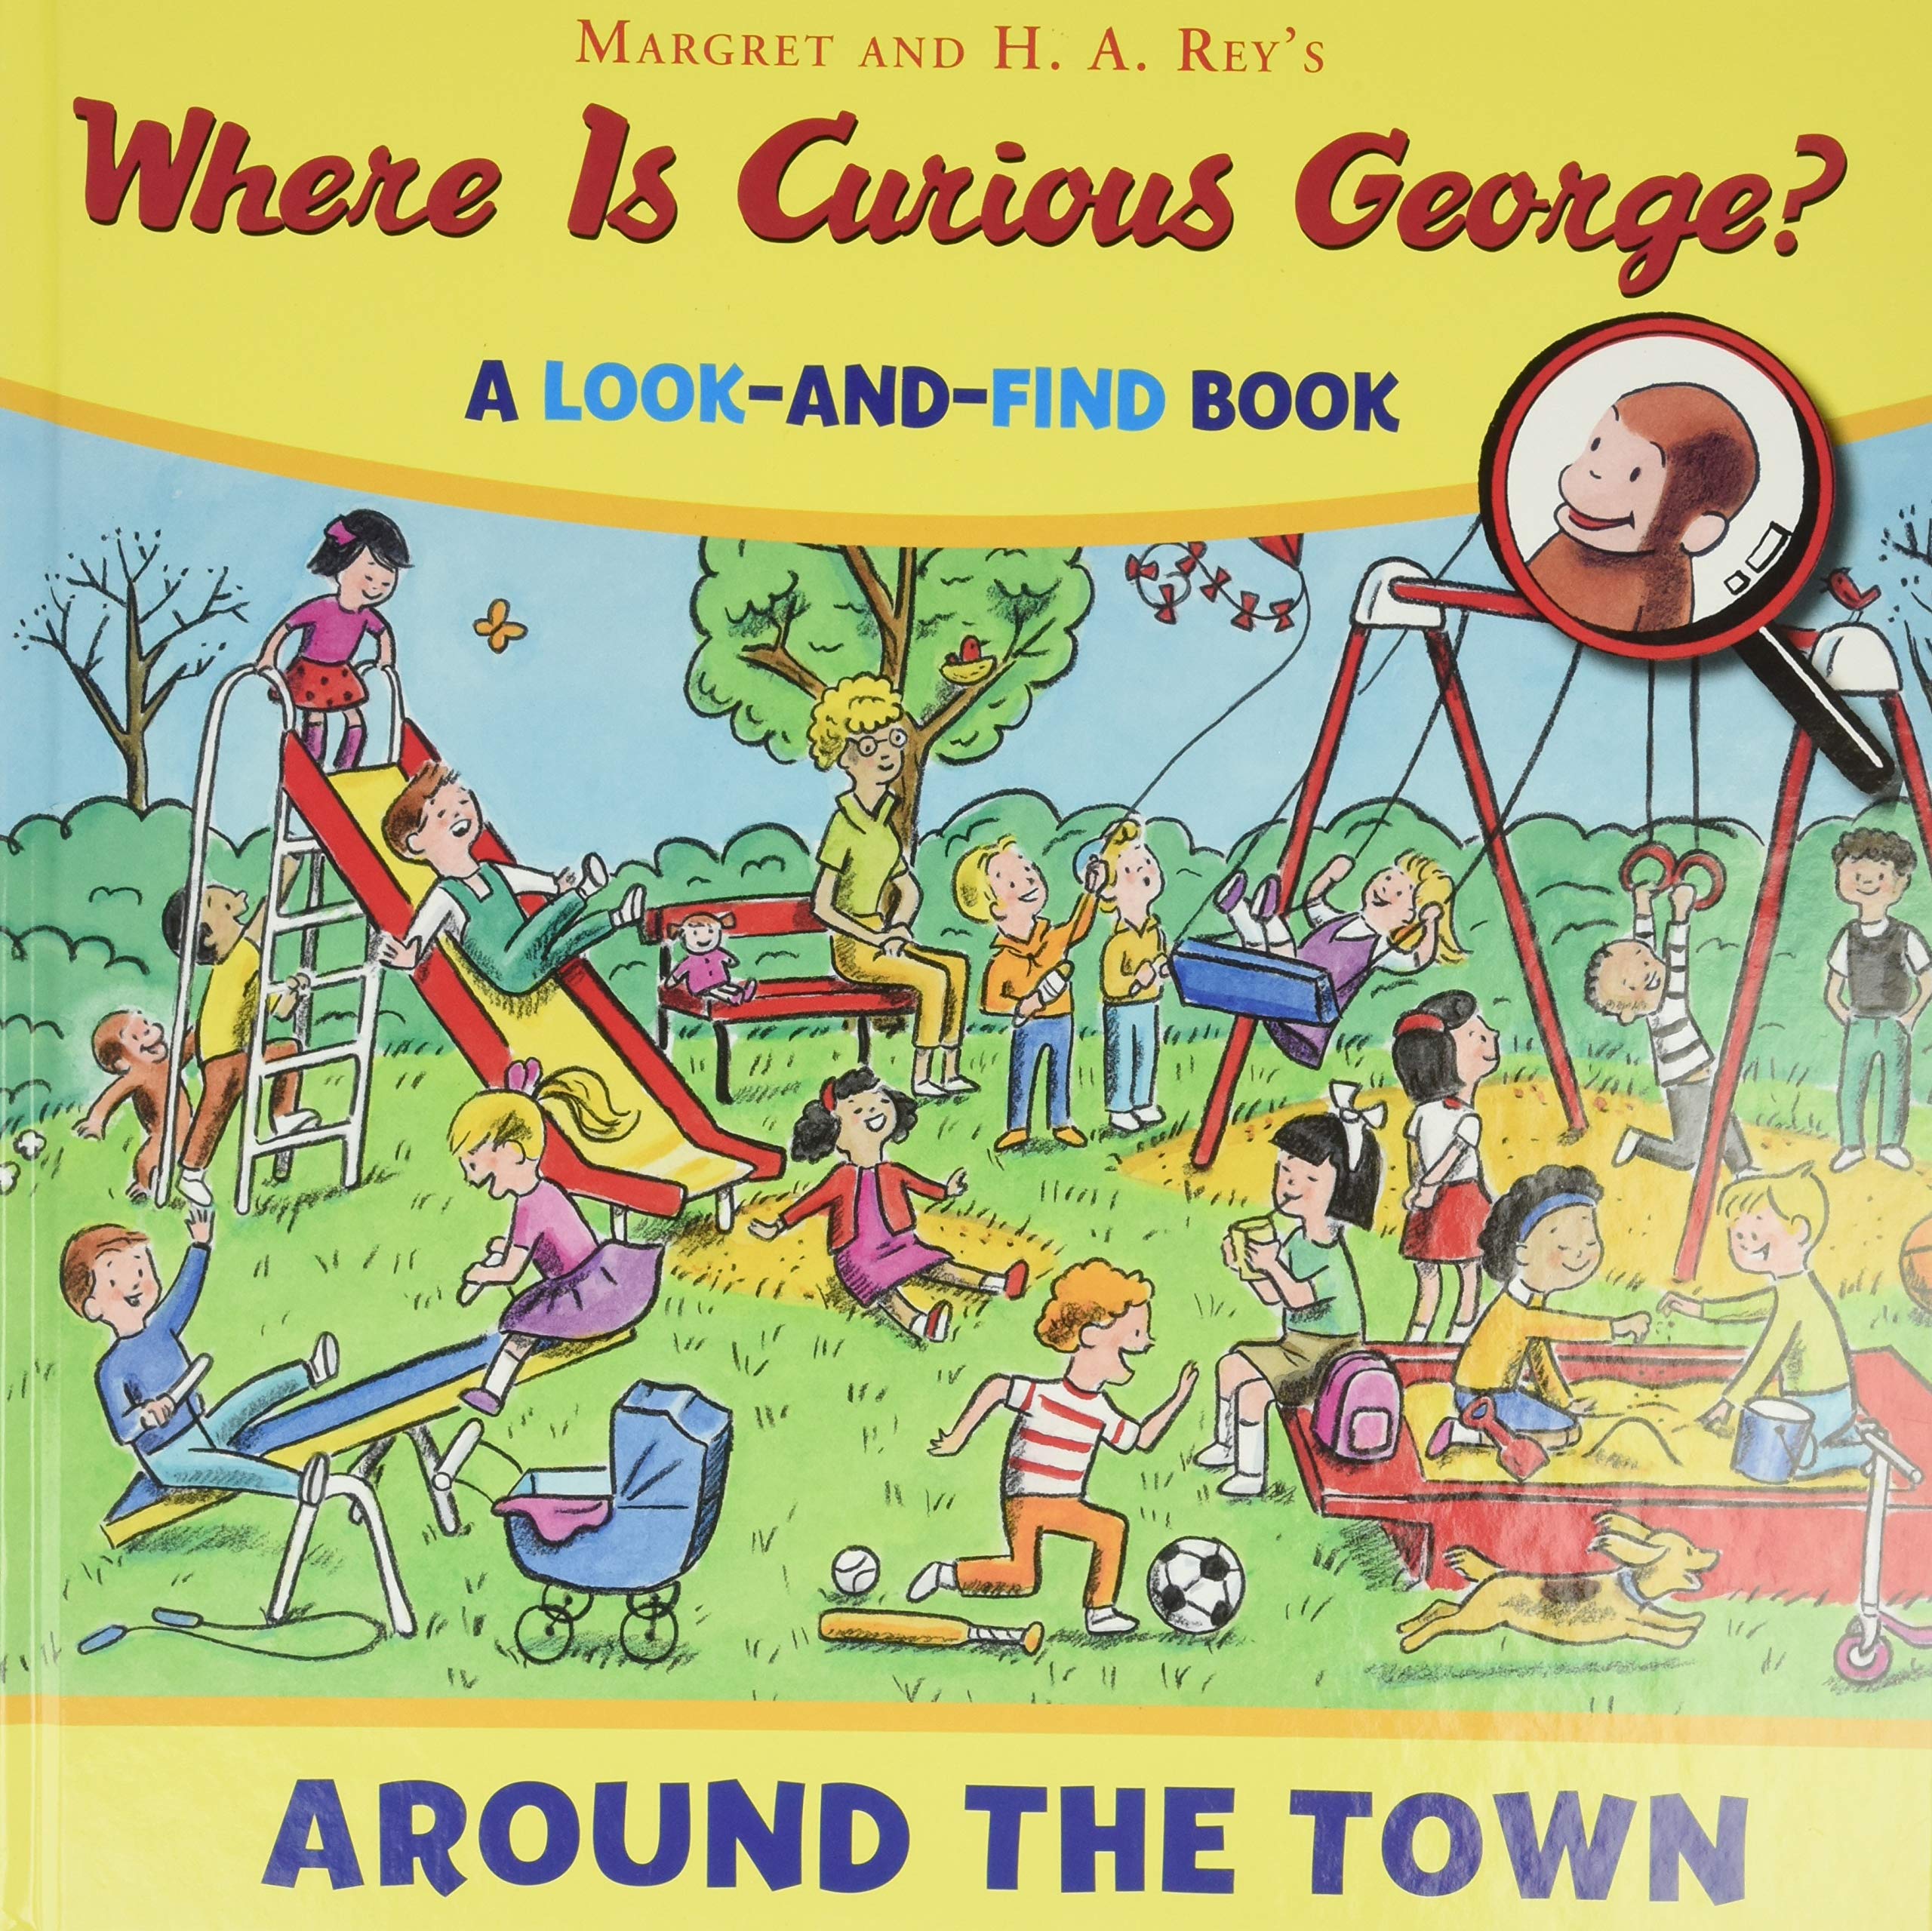 Look　the　Find　Around　Where　Curious　Treehouse　Toys　is　Town　George?　–